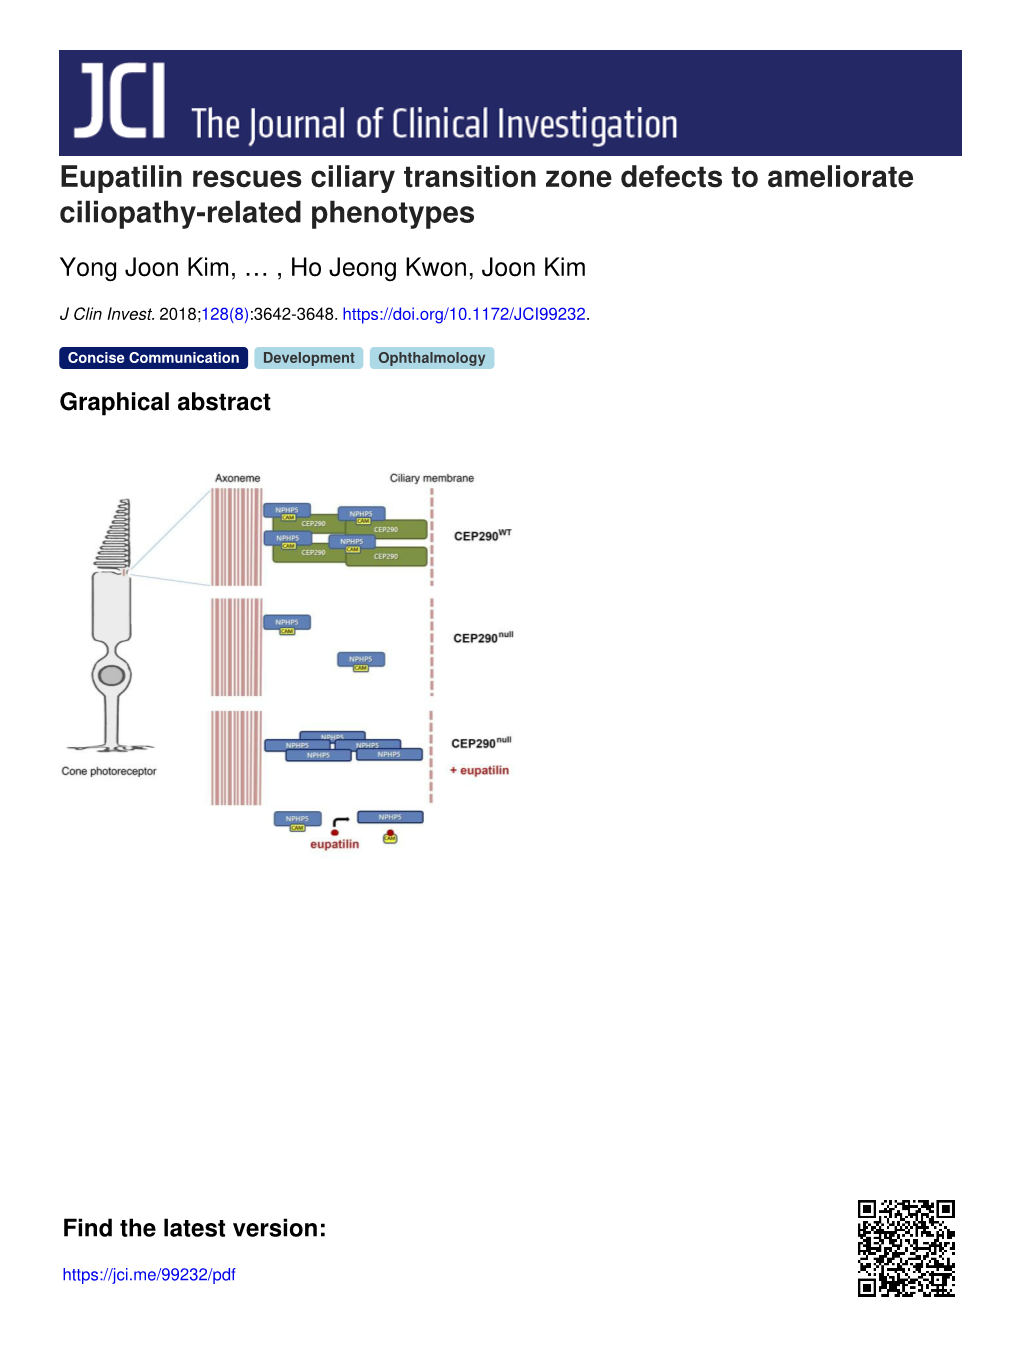 Eupatilin Rescues Ciliary Transition Zone Defects to Ameliorate Ciliopathy-Related Phenotypes